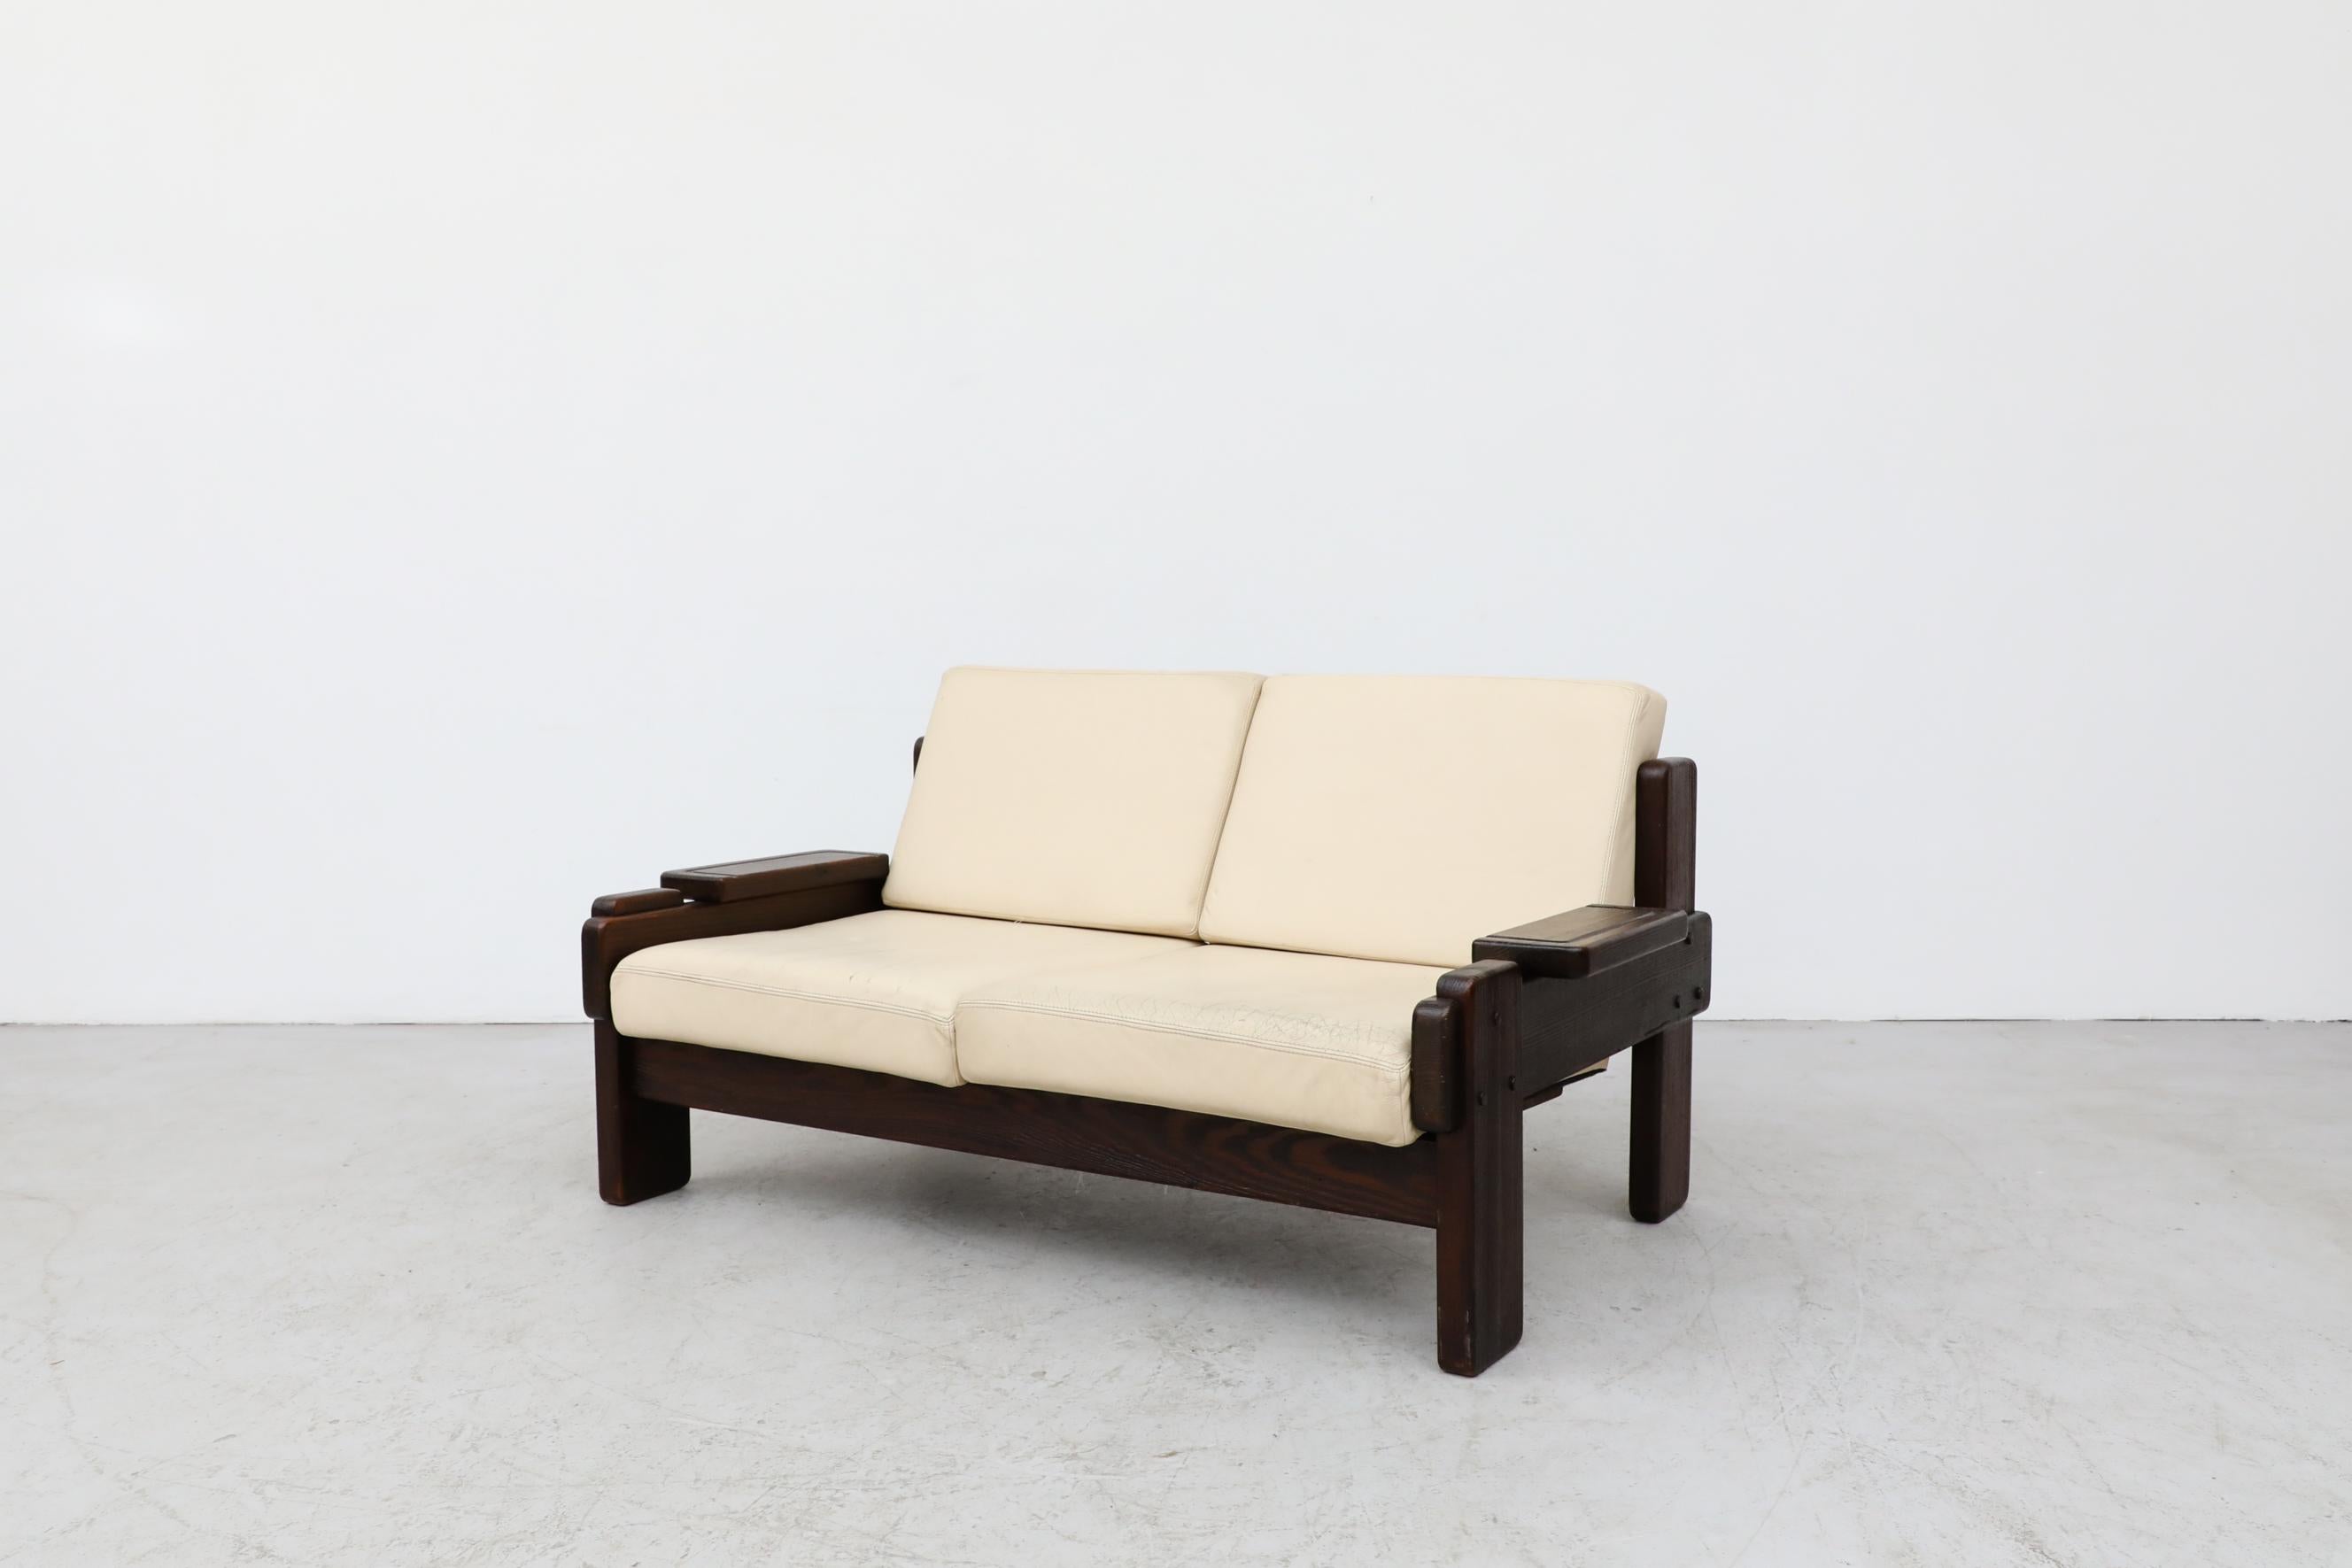 Mid-Century Modern 70's Brutalist Wood Framed Loveseat with Cream Leather Seating